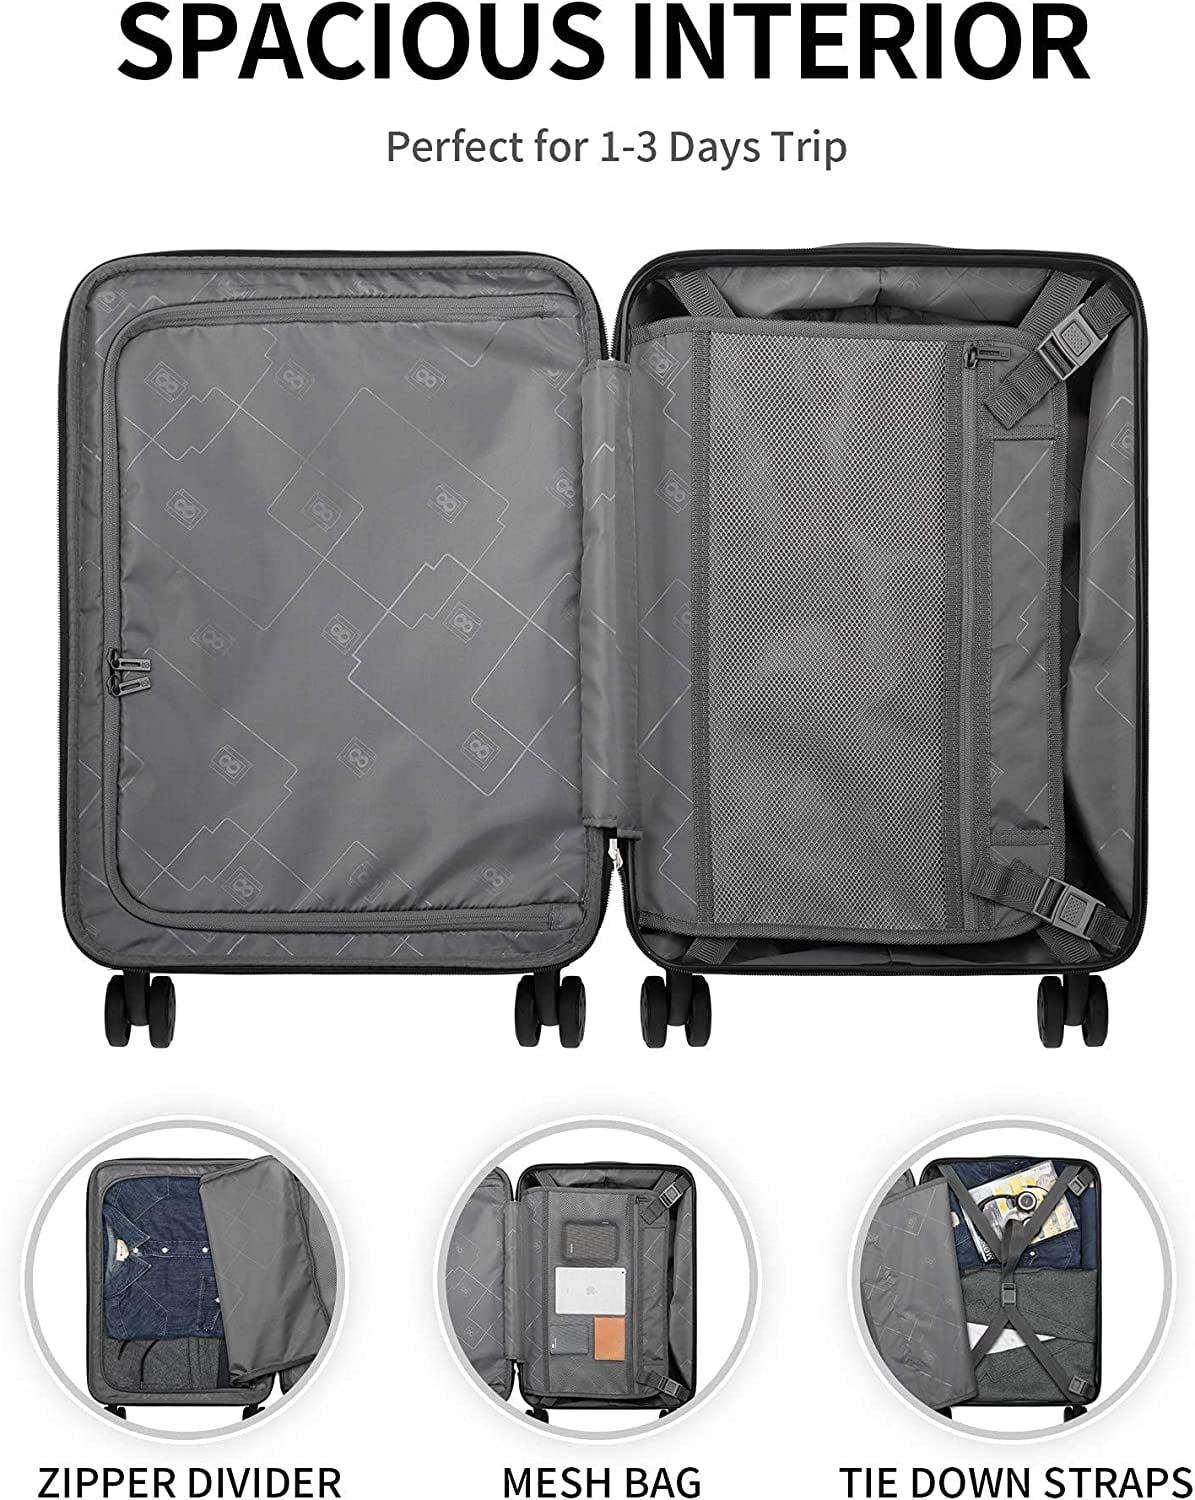 LEVEL8 Grace EXT Hardside Carry On Luggage with Front Compartment,  Expandable Suitcases with Wheels, Lightweight Carry On Suitcase for  Airplane, TSA